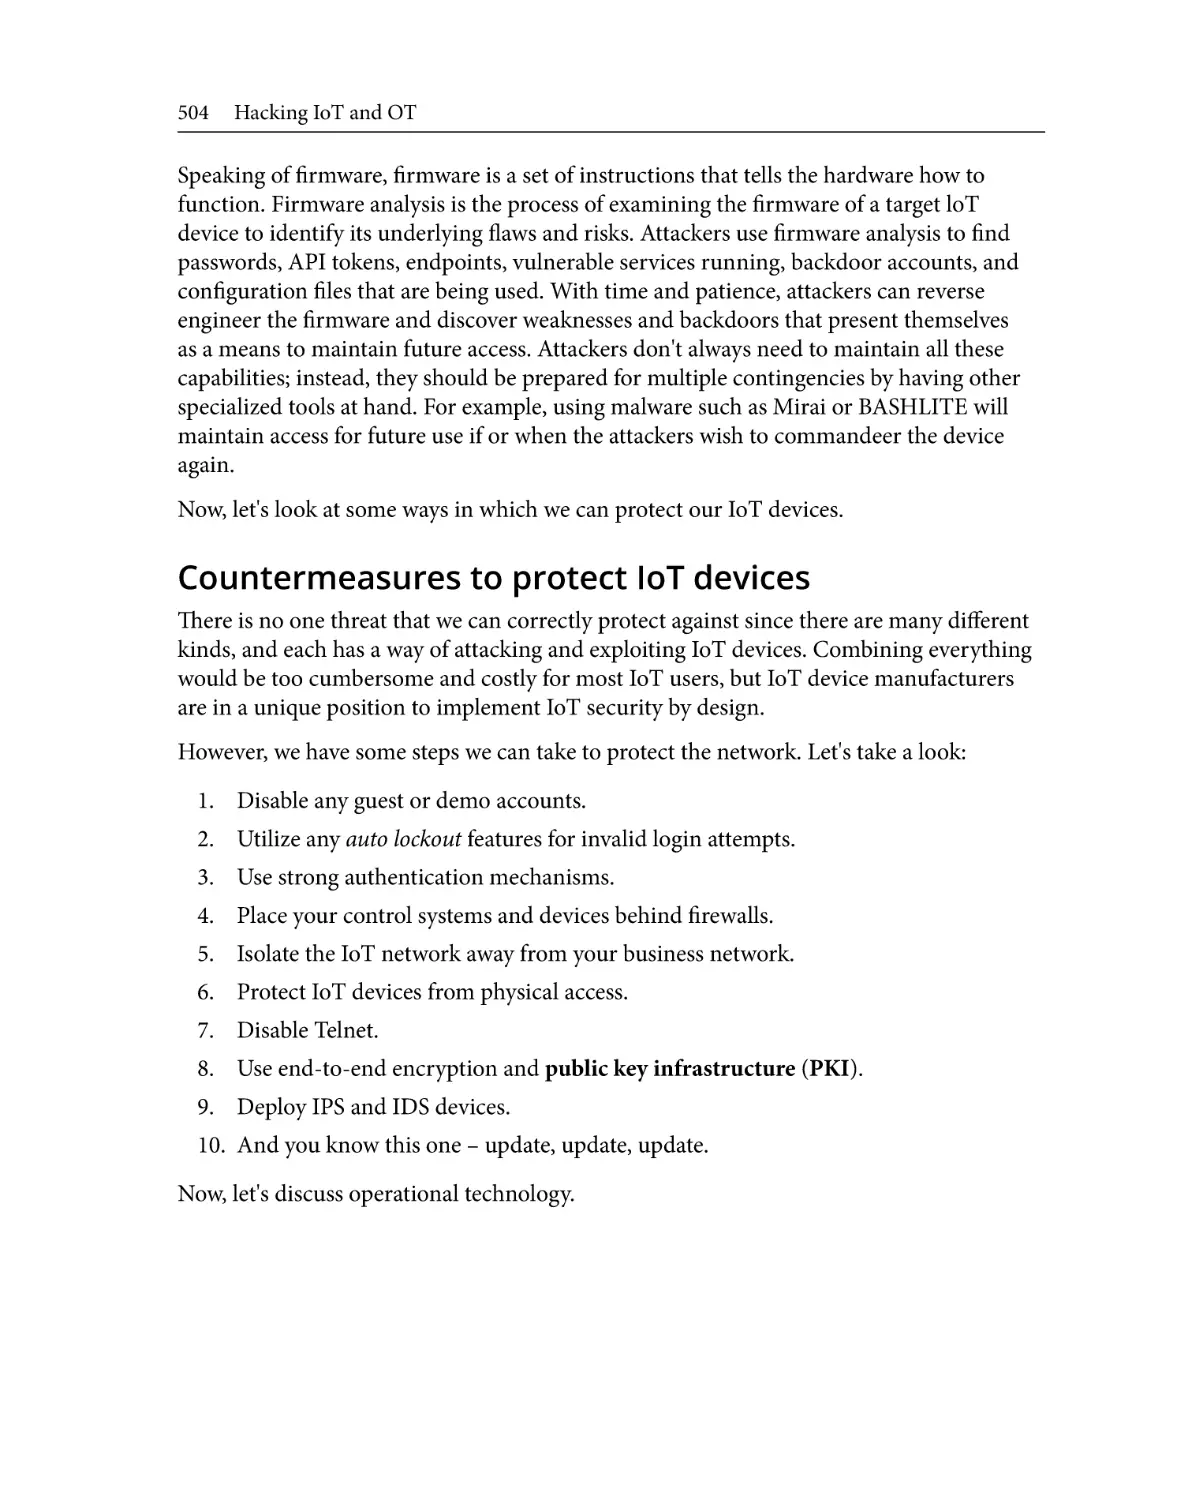 Countermeasures to protect IoT devices